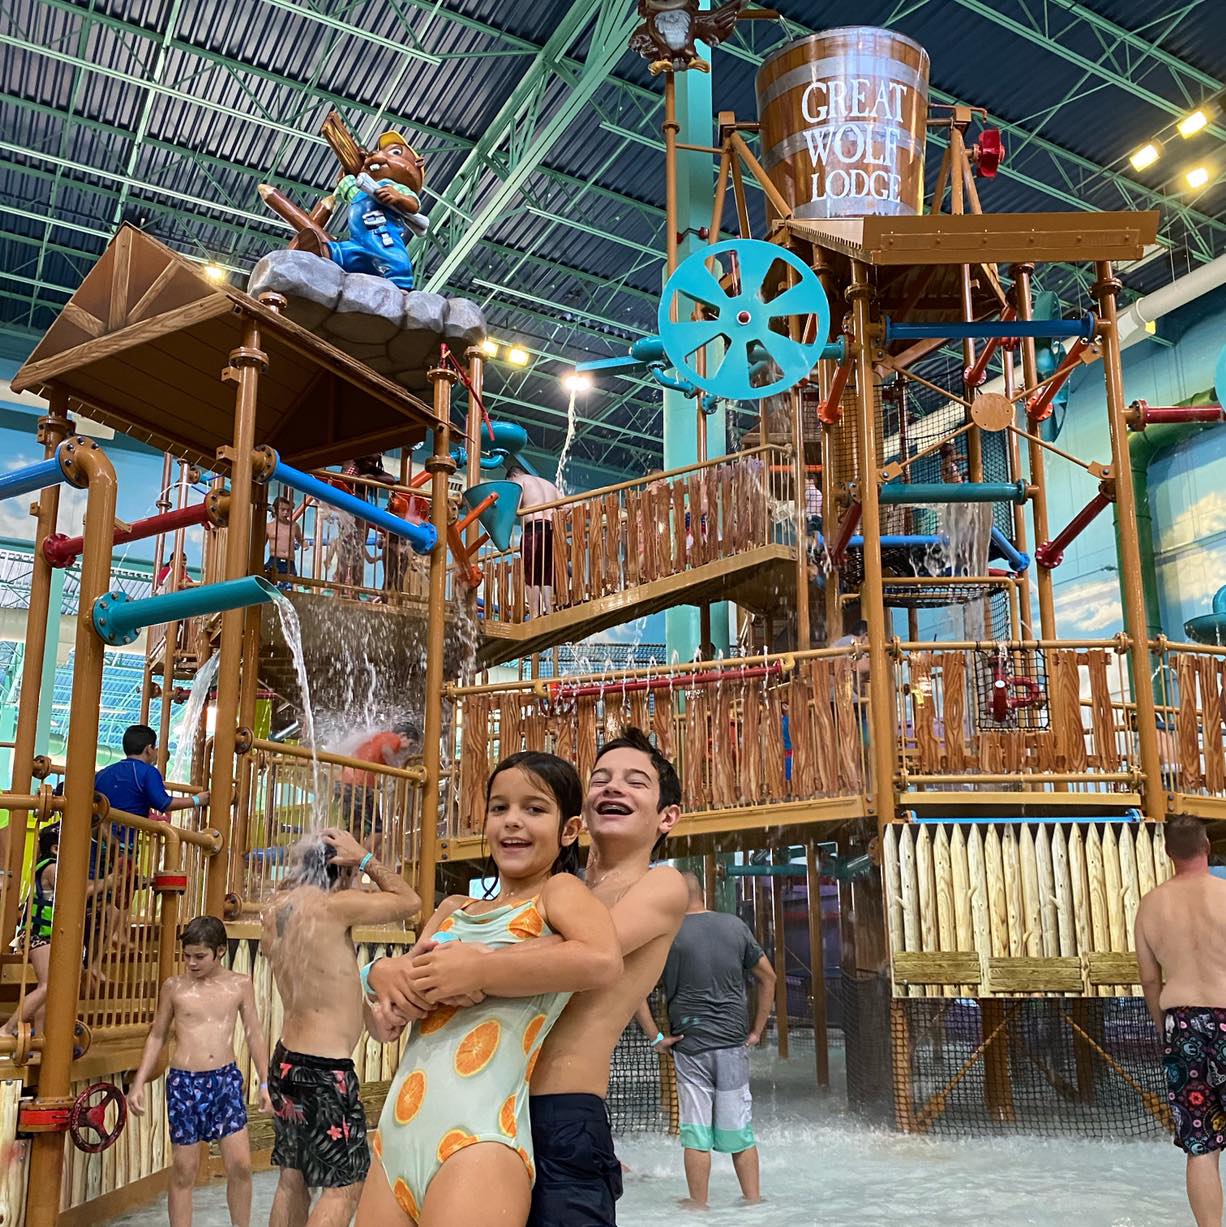 Great Wolf Lodge Water Park, Scottsdale